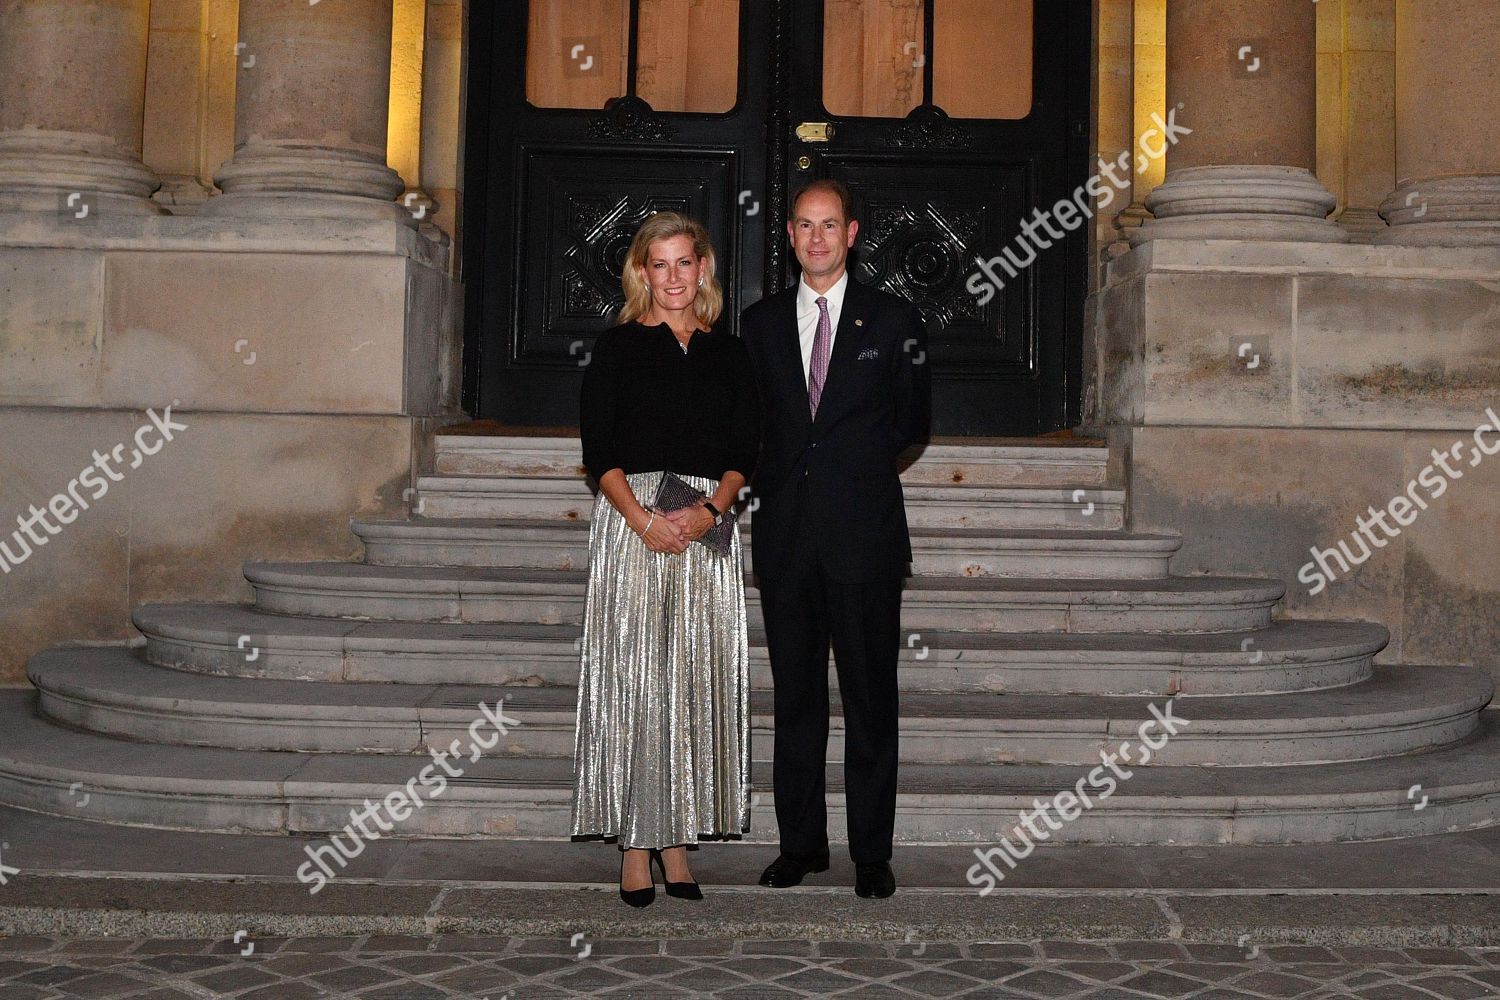 prince-edward-and-sophie-countess-of-wessex-visit-to-france-shutterstock-editorial-9907868av.jpg